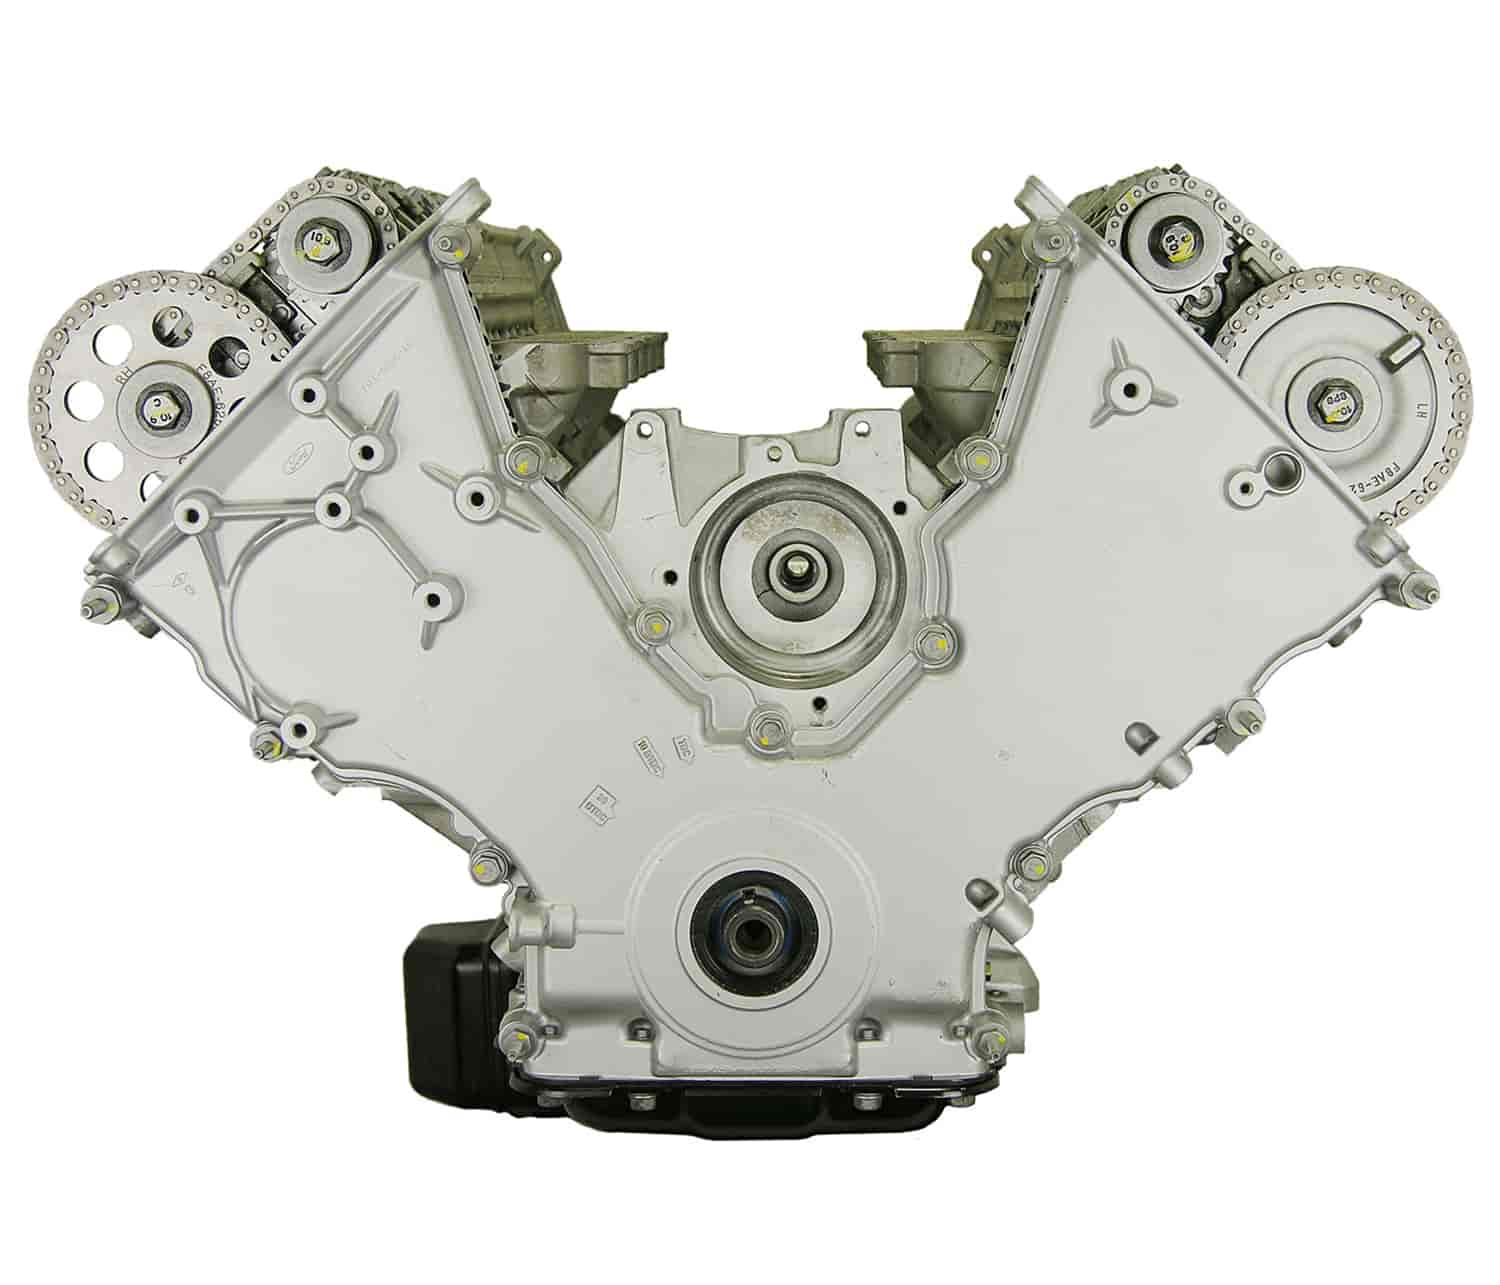 Remanufactured Crate Engine for 1993-1995 Lincoln Mark VIII with 4.6L V8